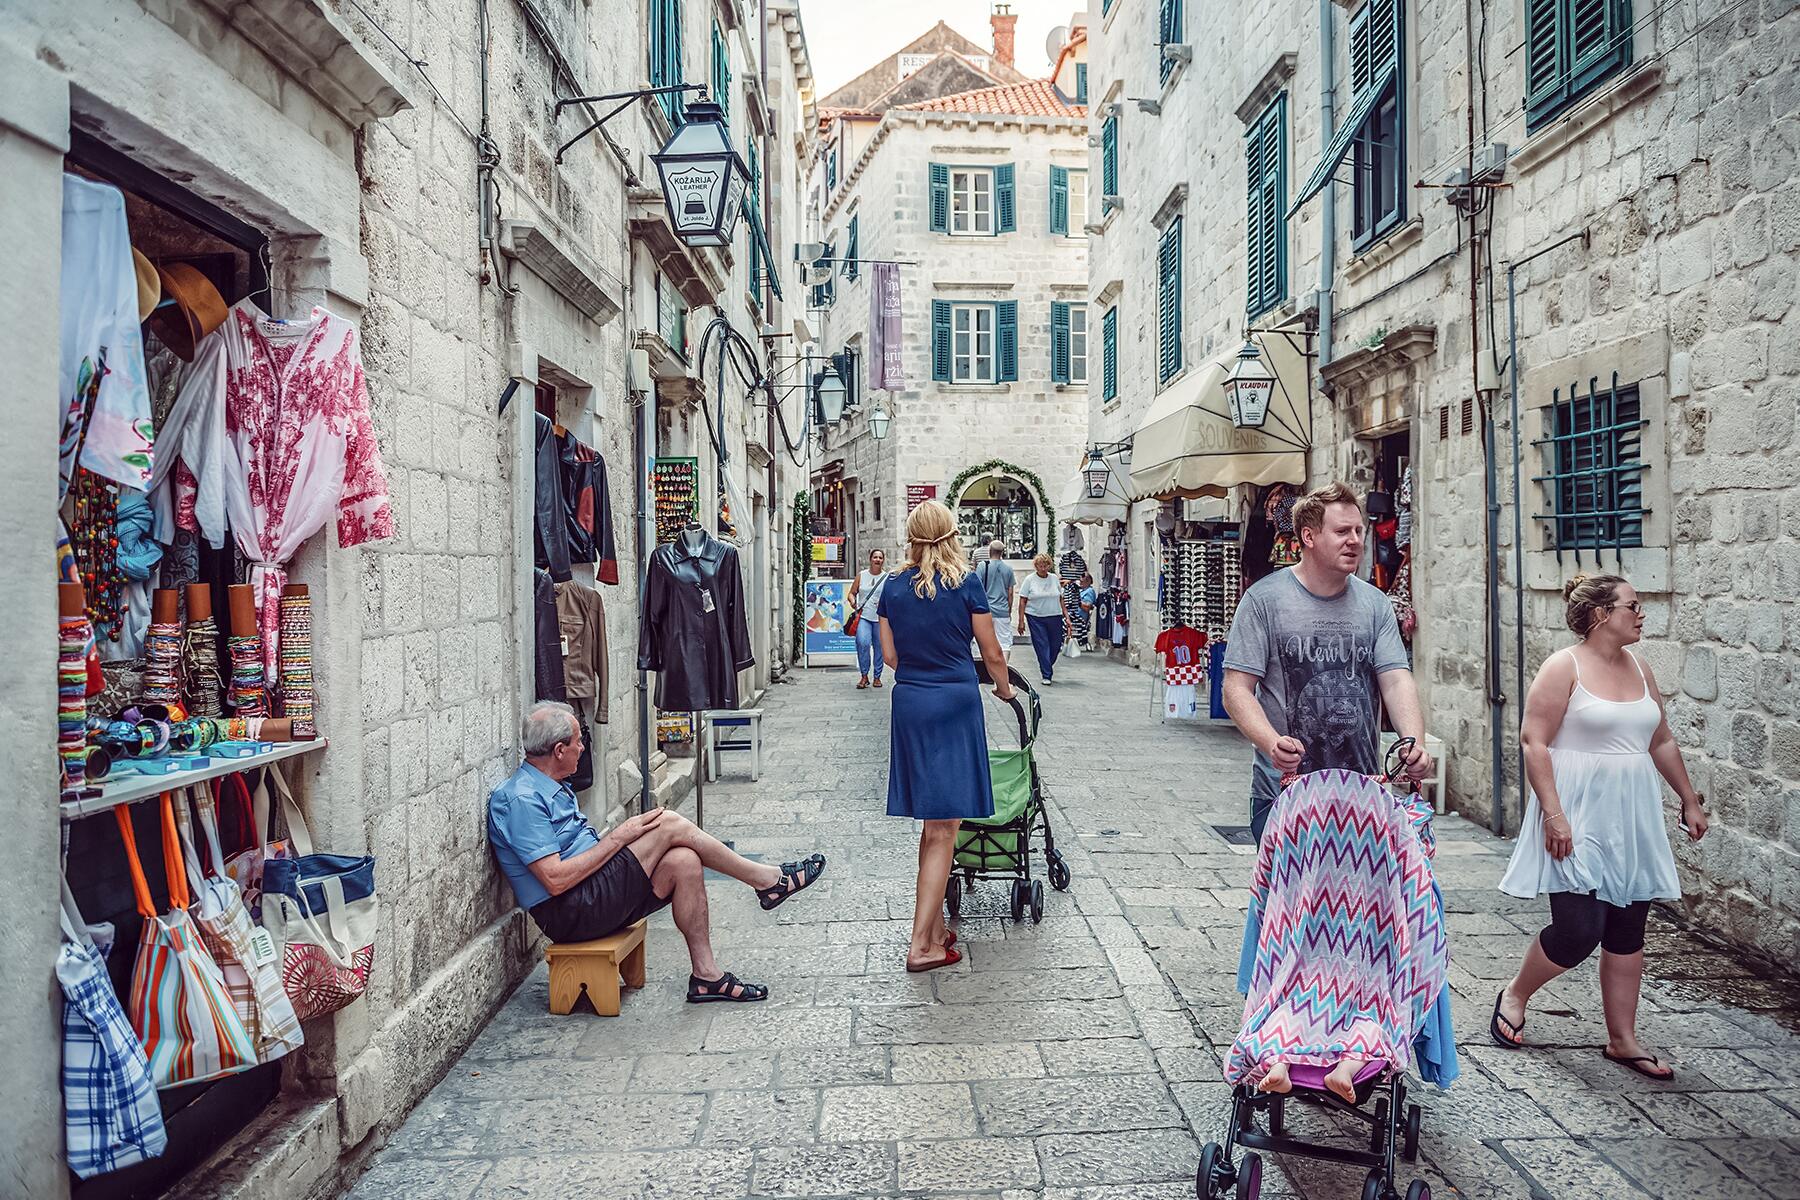 Tips to Avoiding the Crowds in Dubrovnik